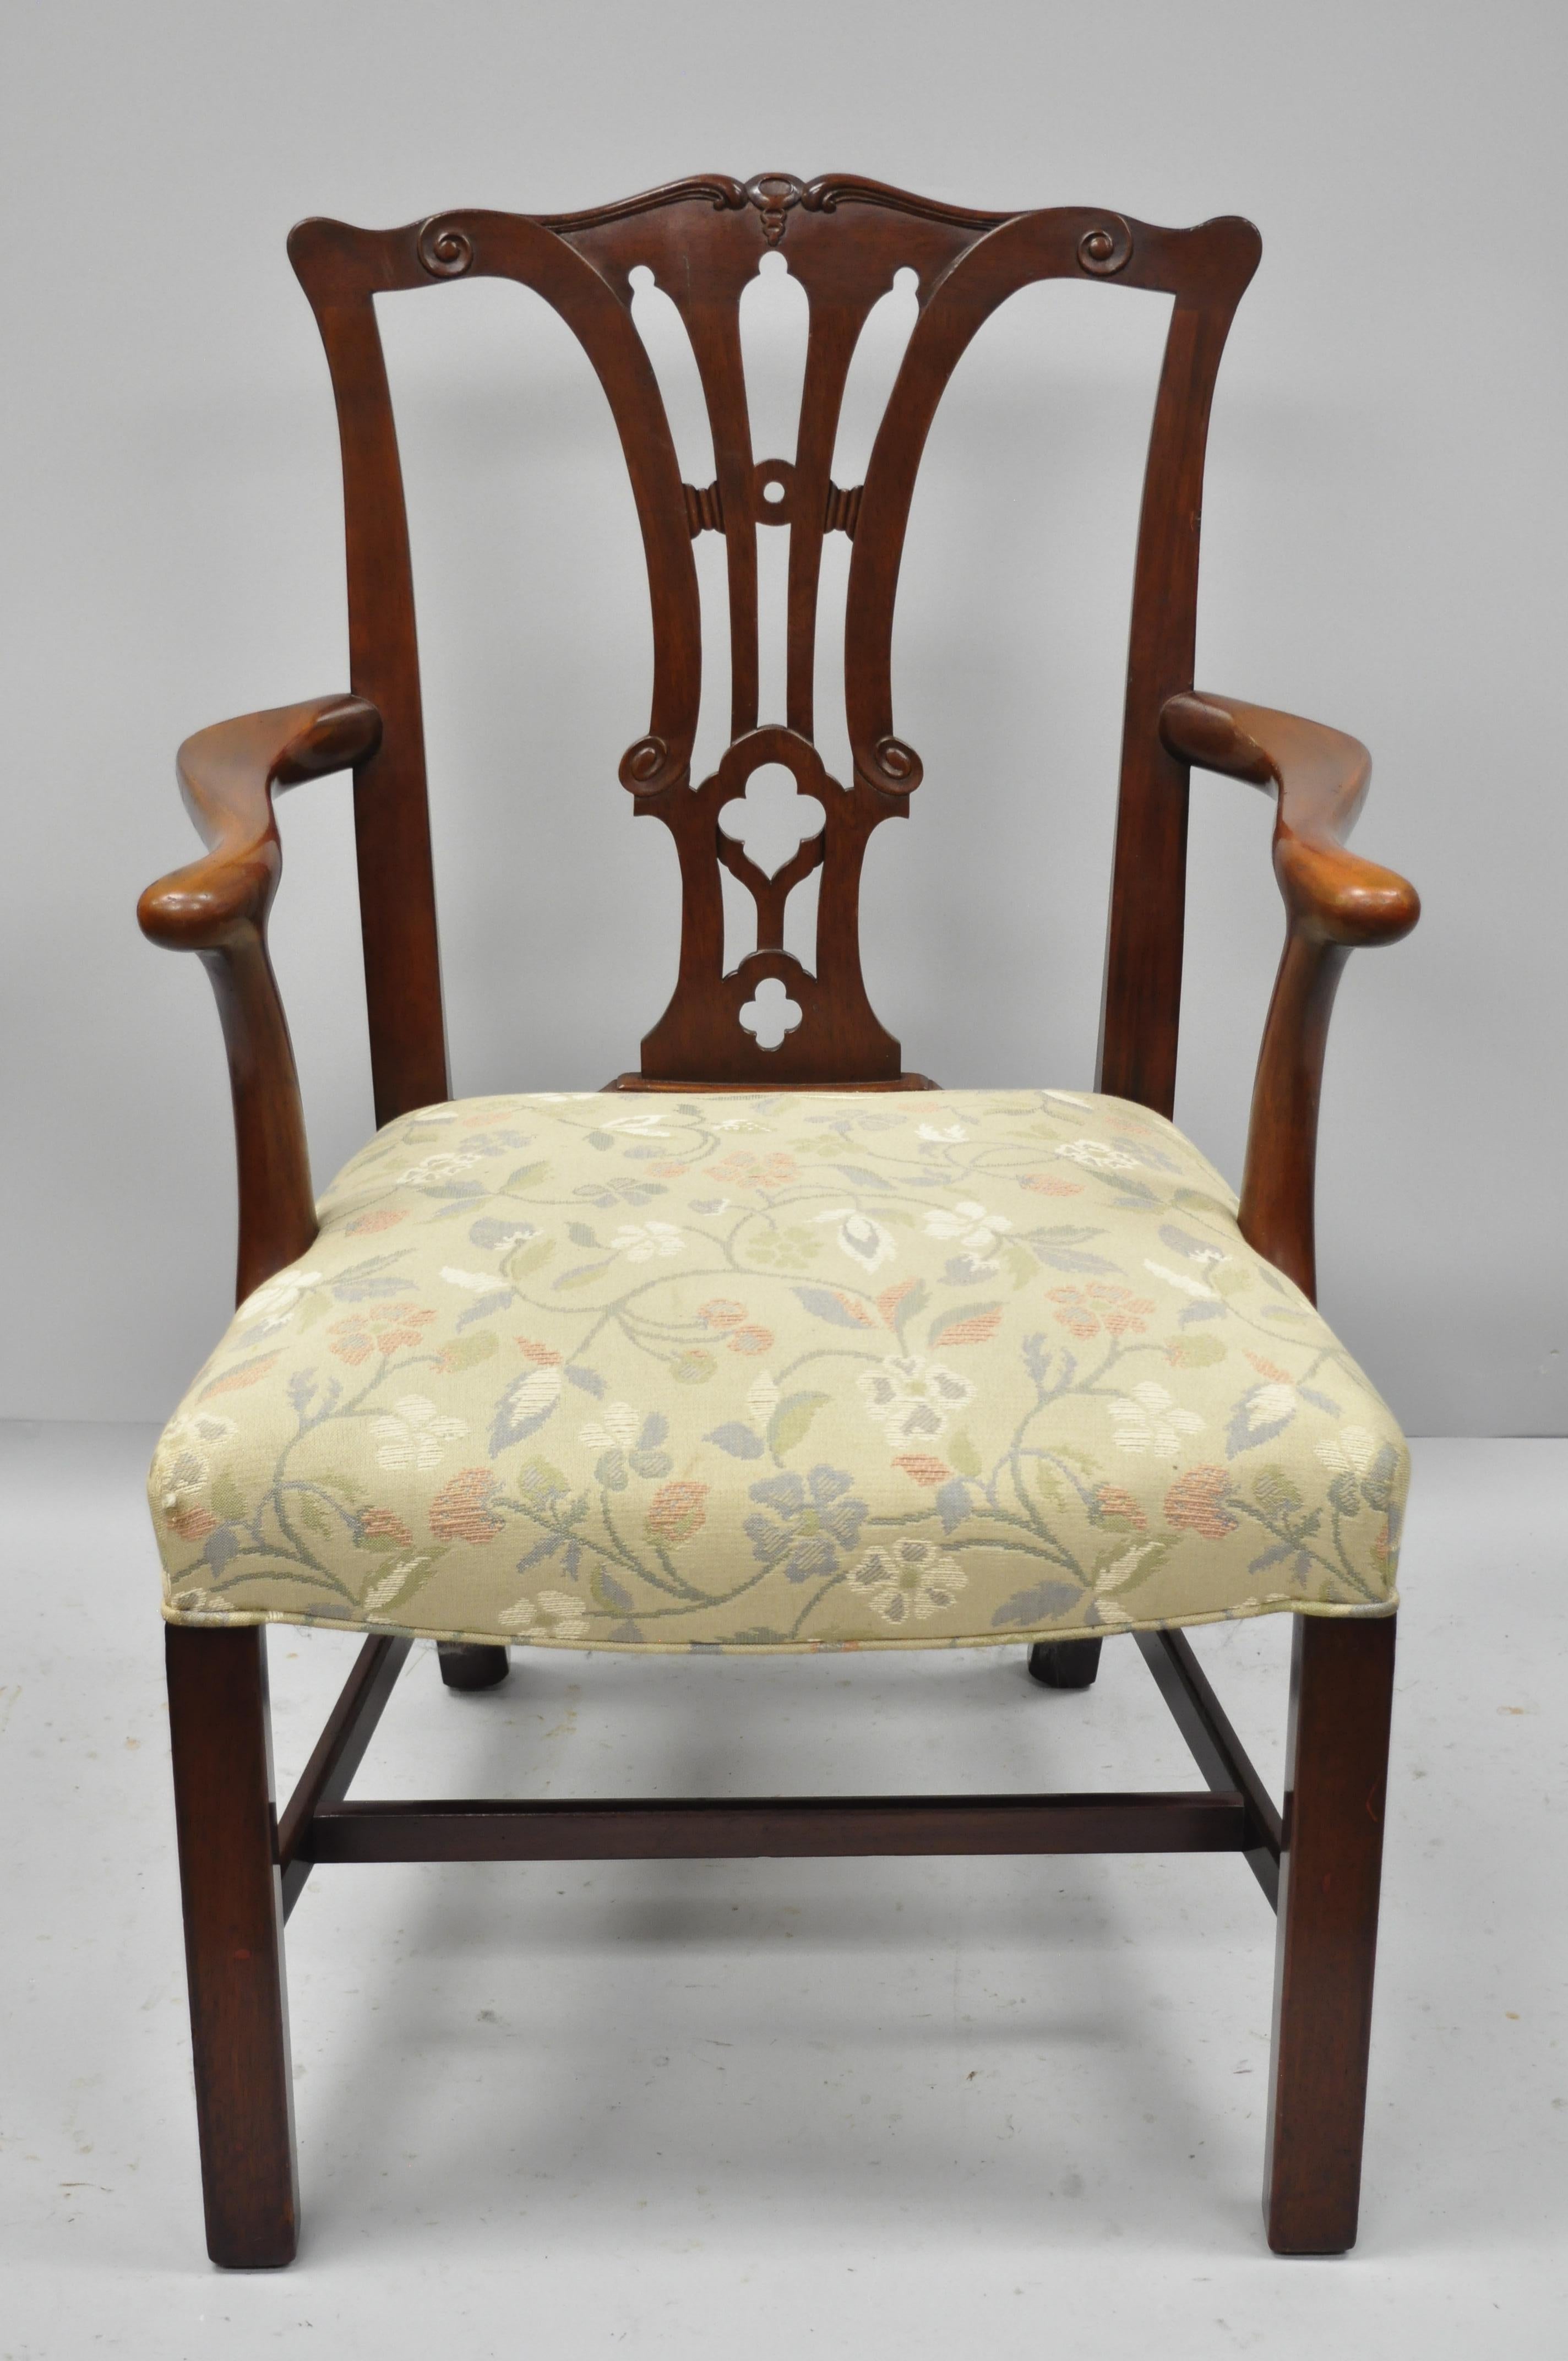 American Pair of Schmieg & Kotzian Mahogany Chippendale Style Dining Chairs Armchairs